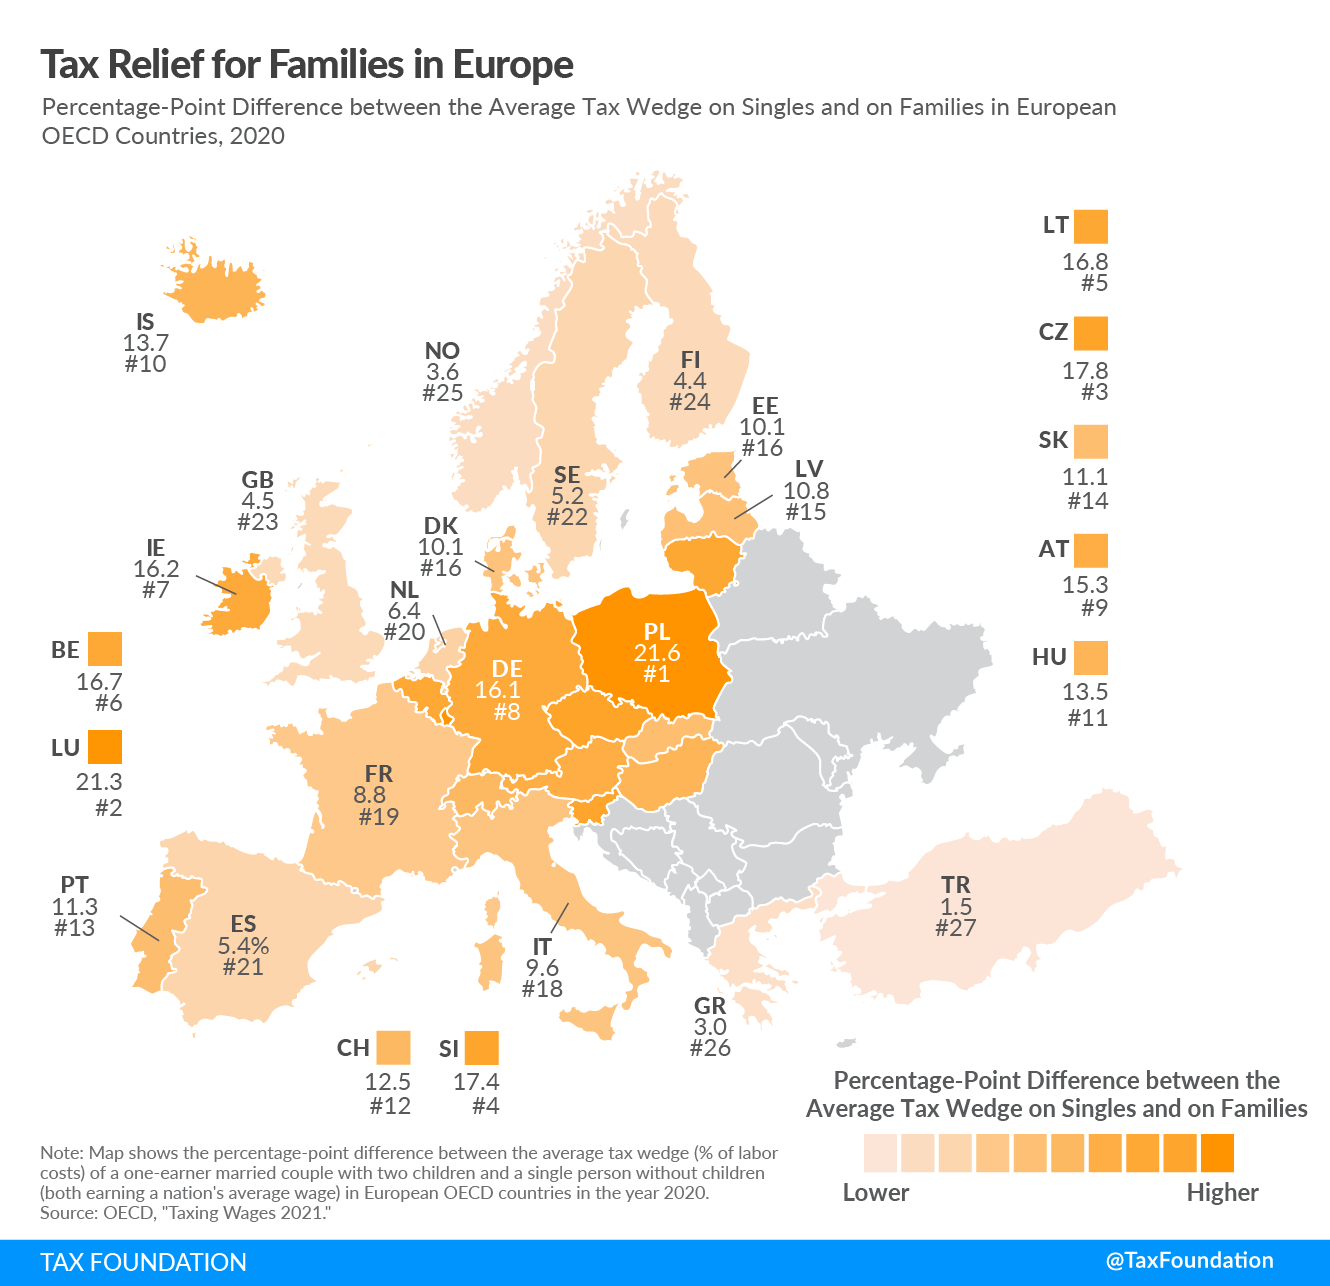 Tax Relief for Families in Europe 2021 countries provide tax relief for families vs single worker without children